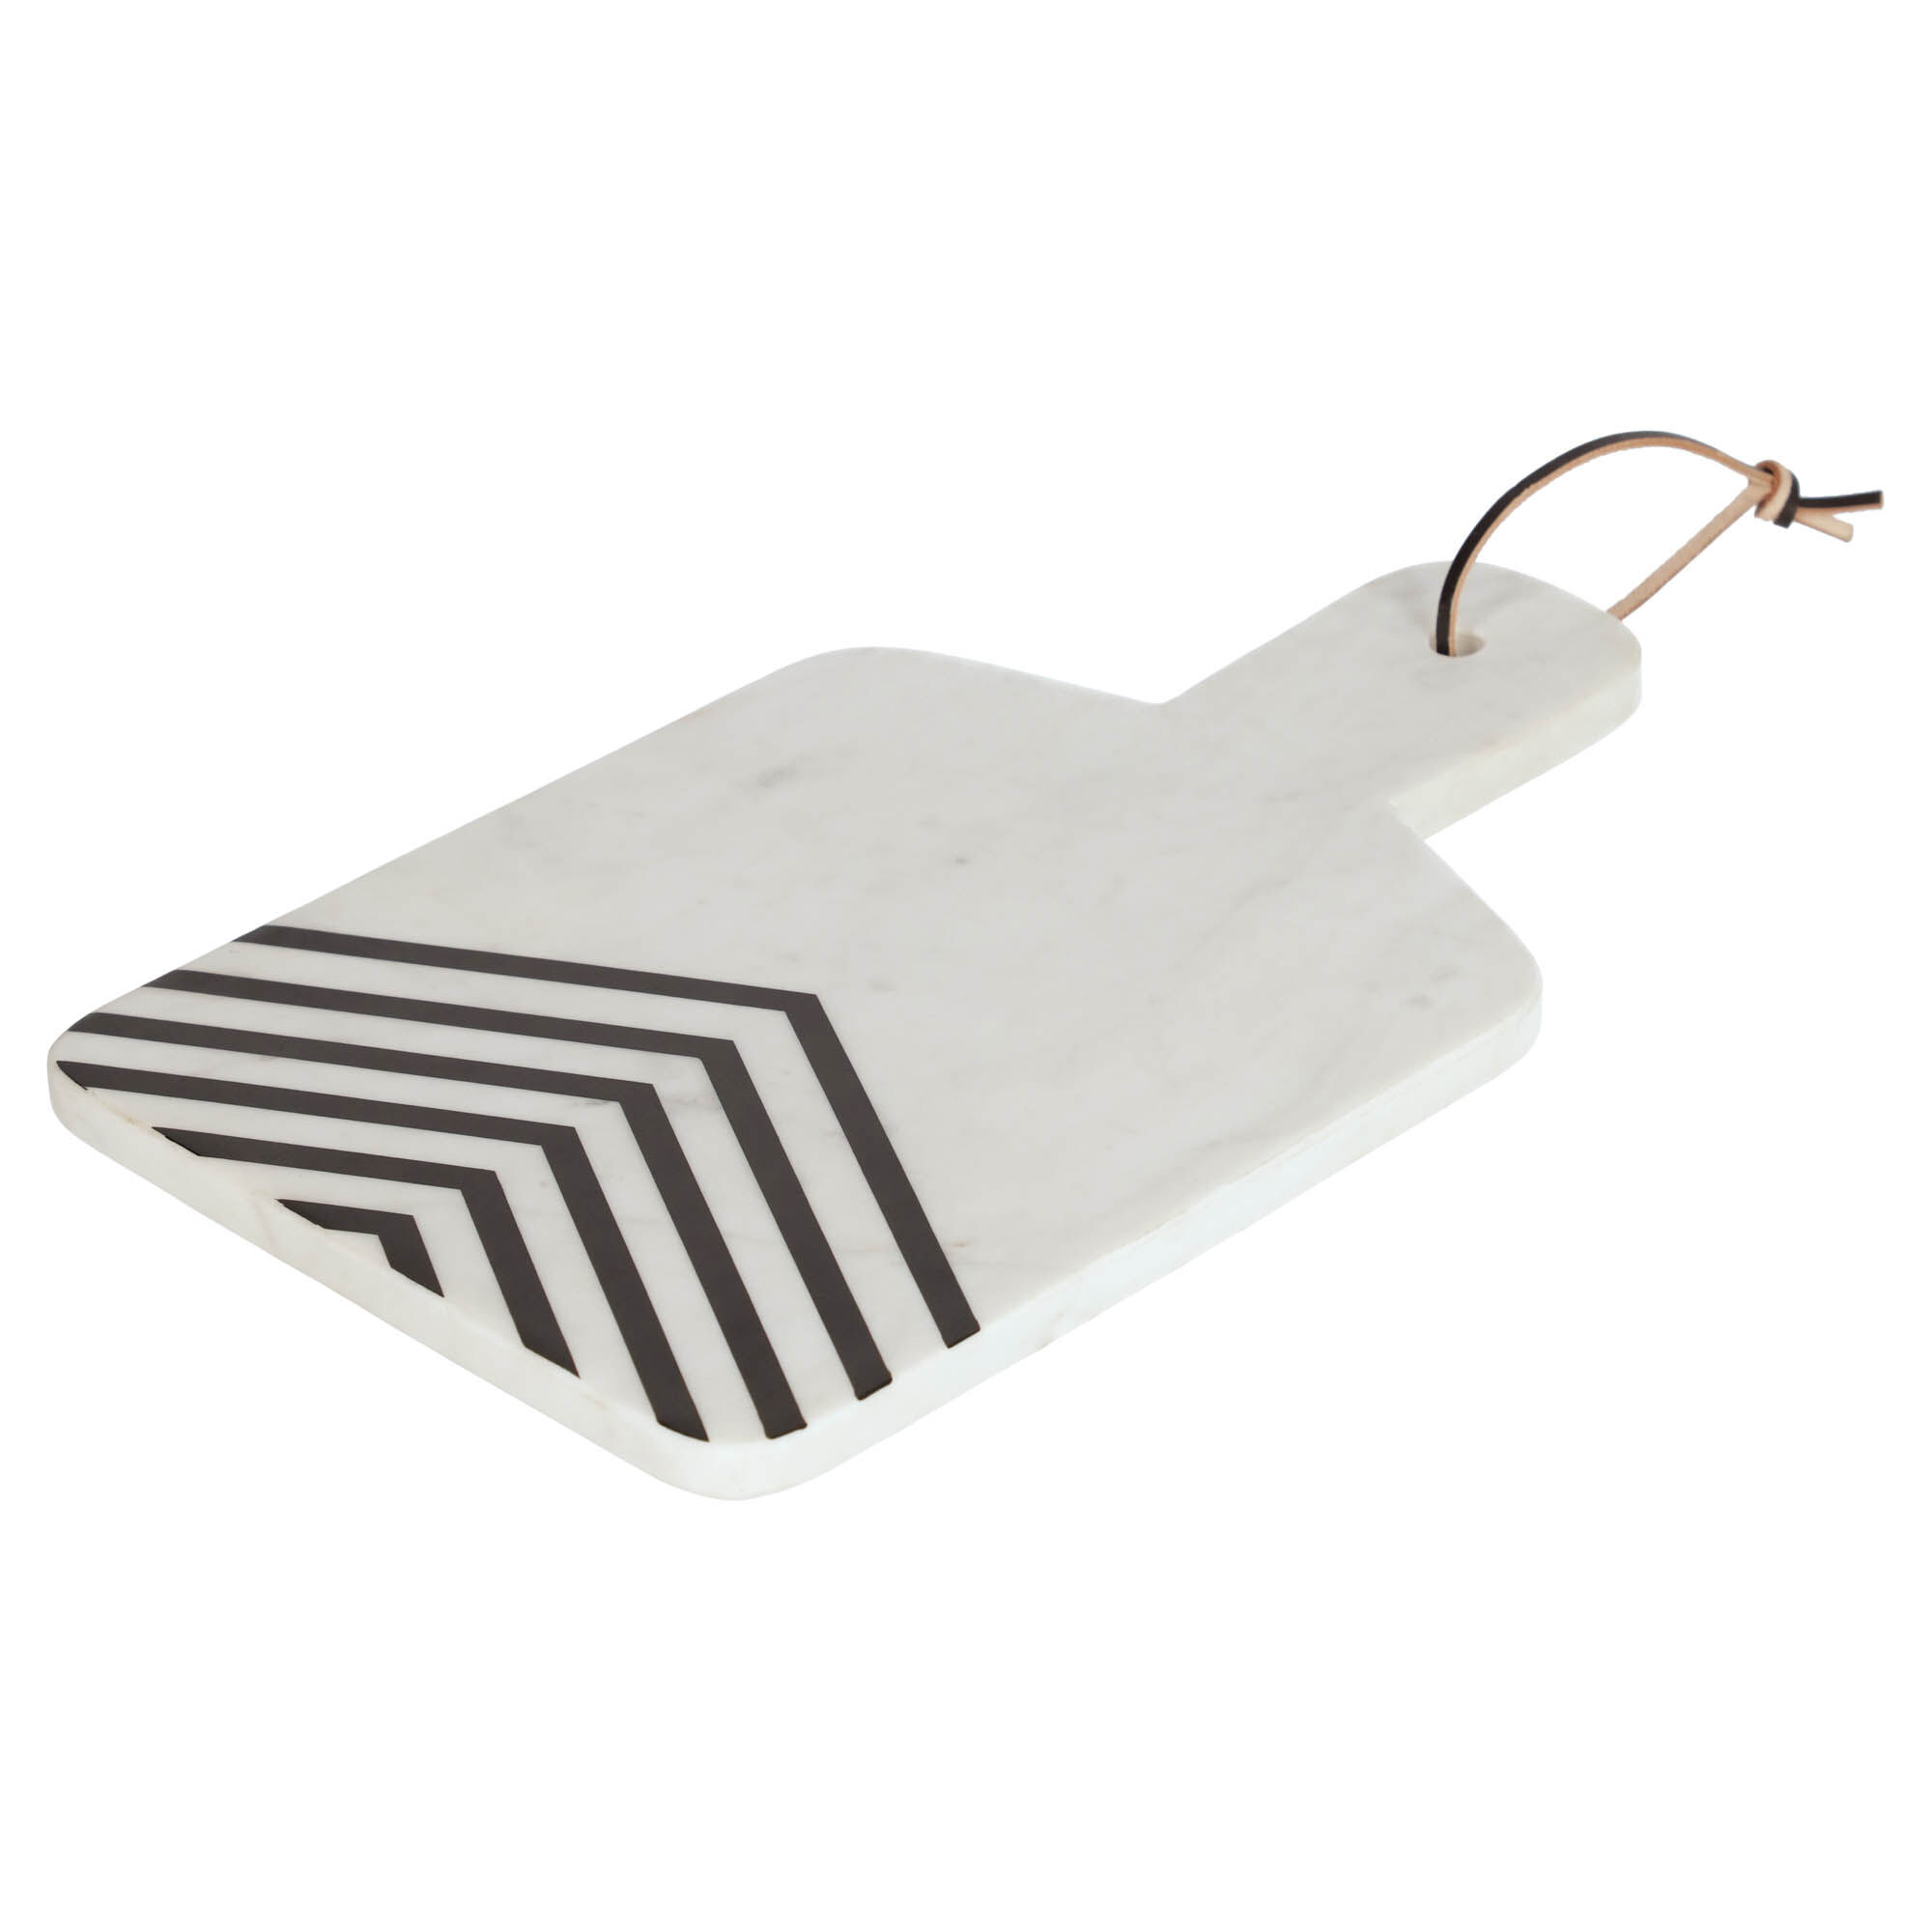 Kave Home Imeris marble serving board